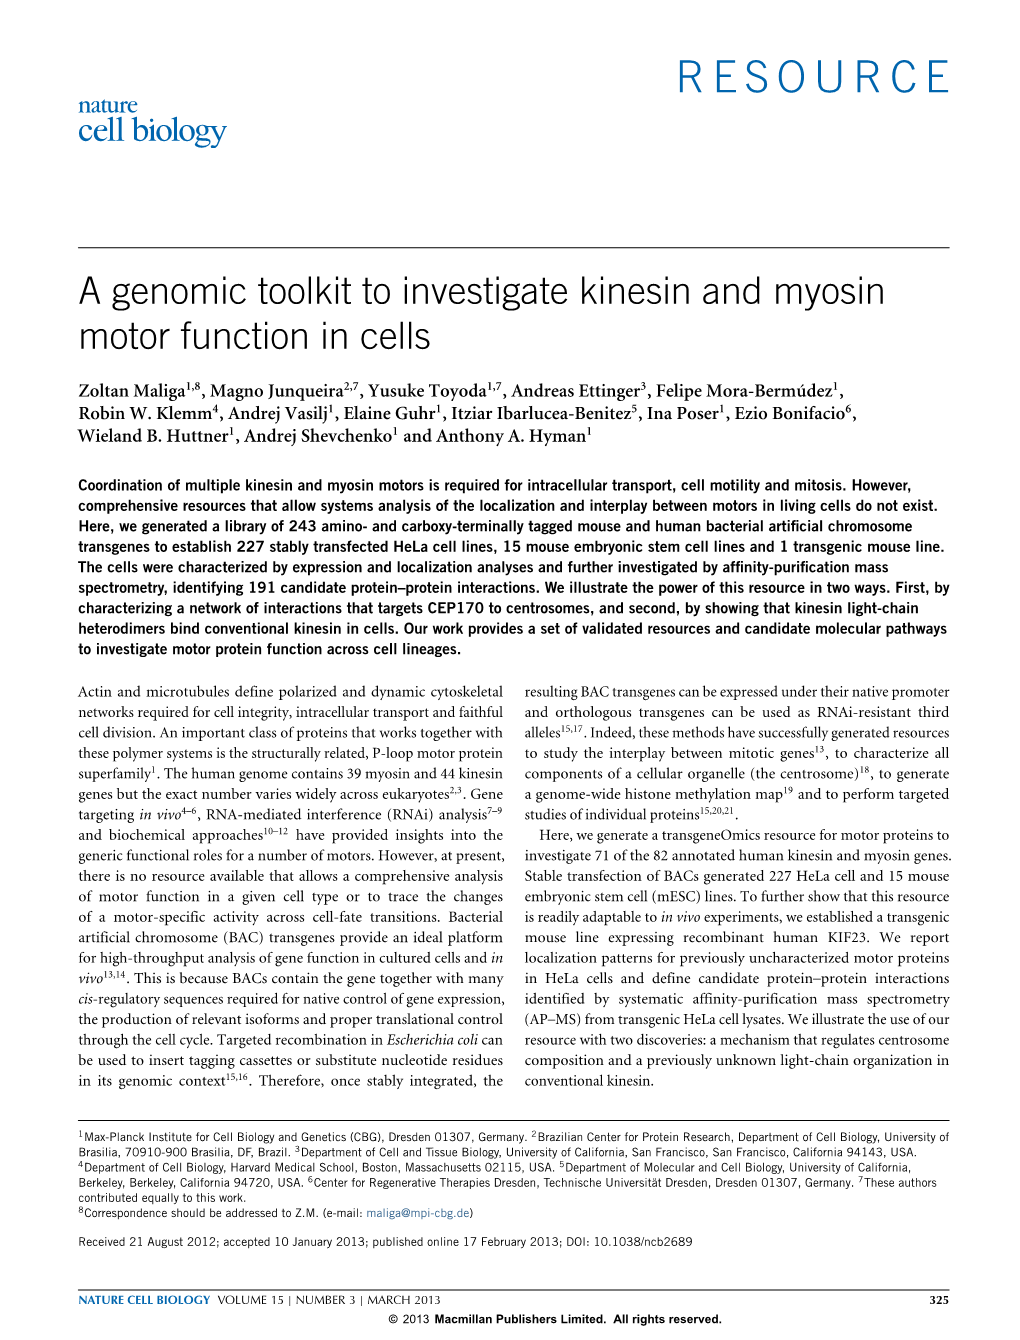 A Genomic Toolkit to Investigate Kinesin and Myosin Motor Function in Cells